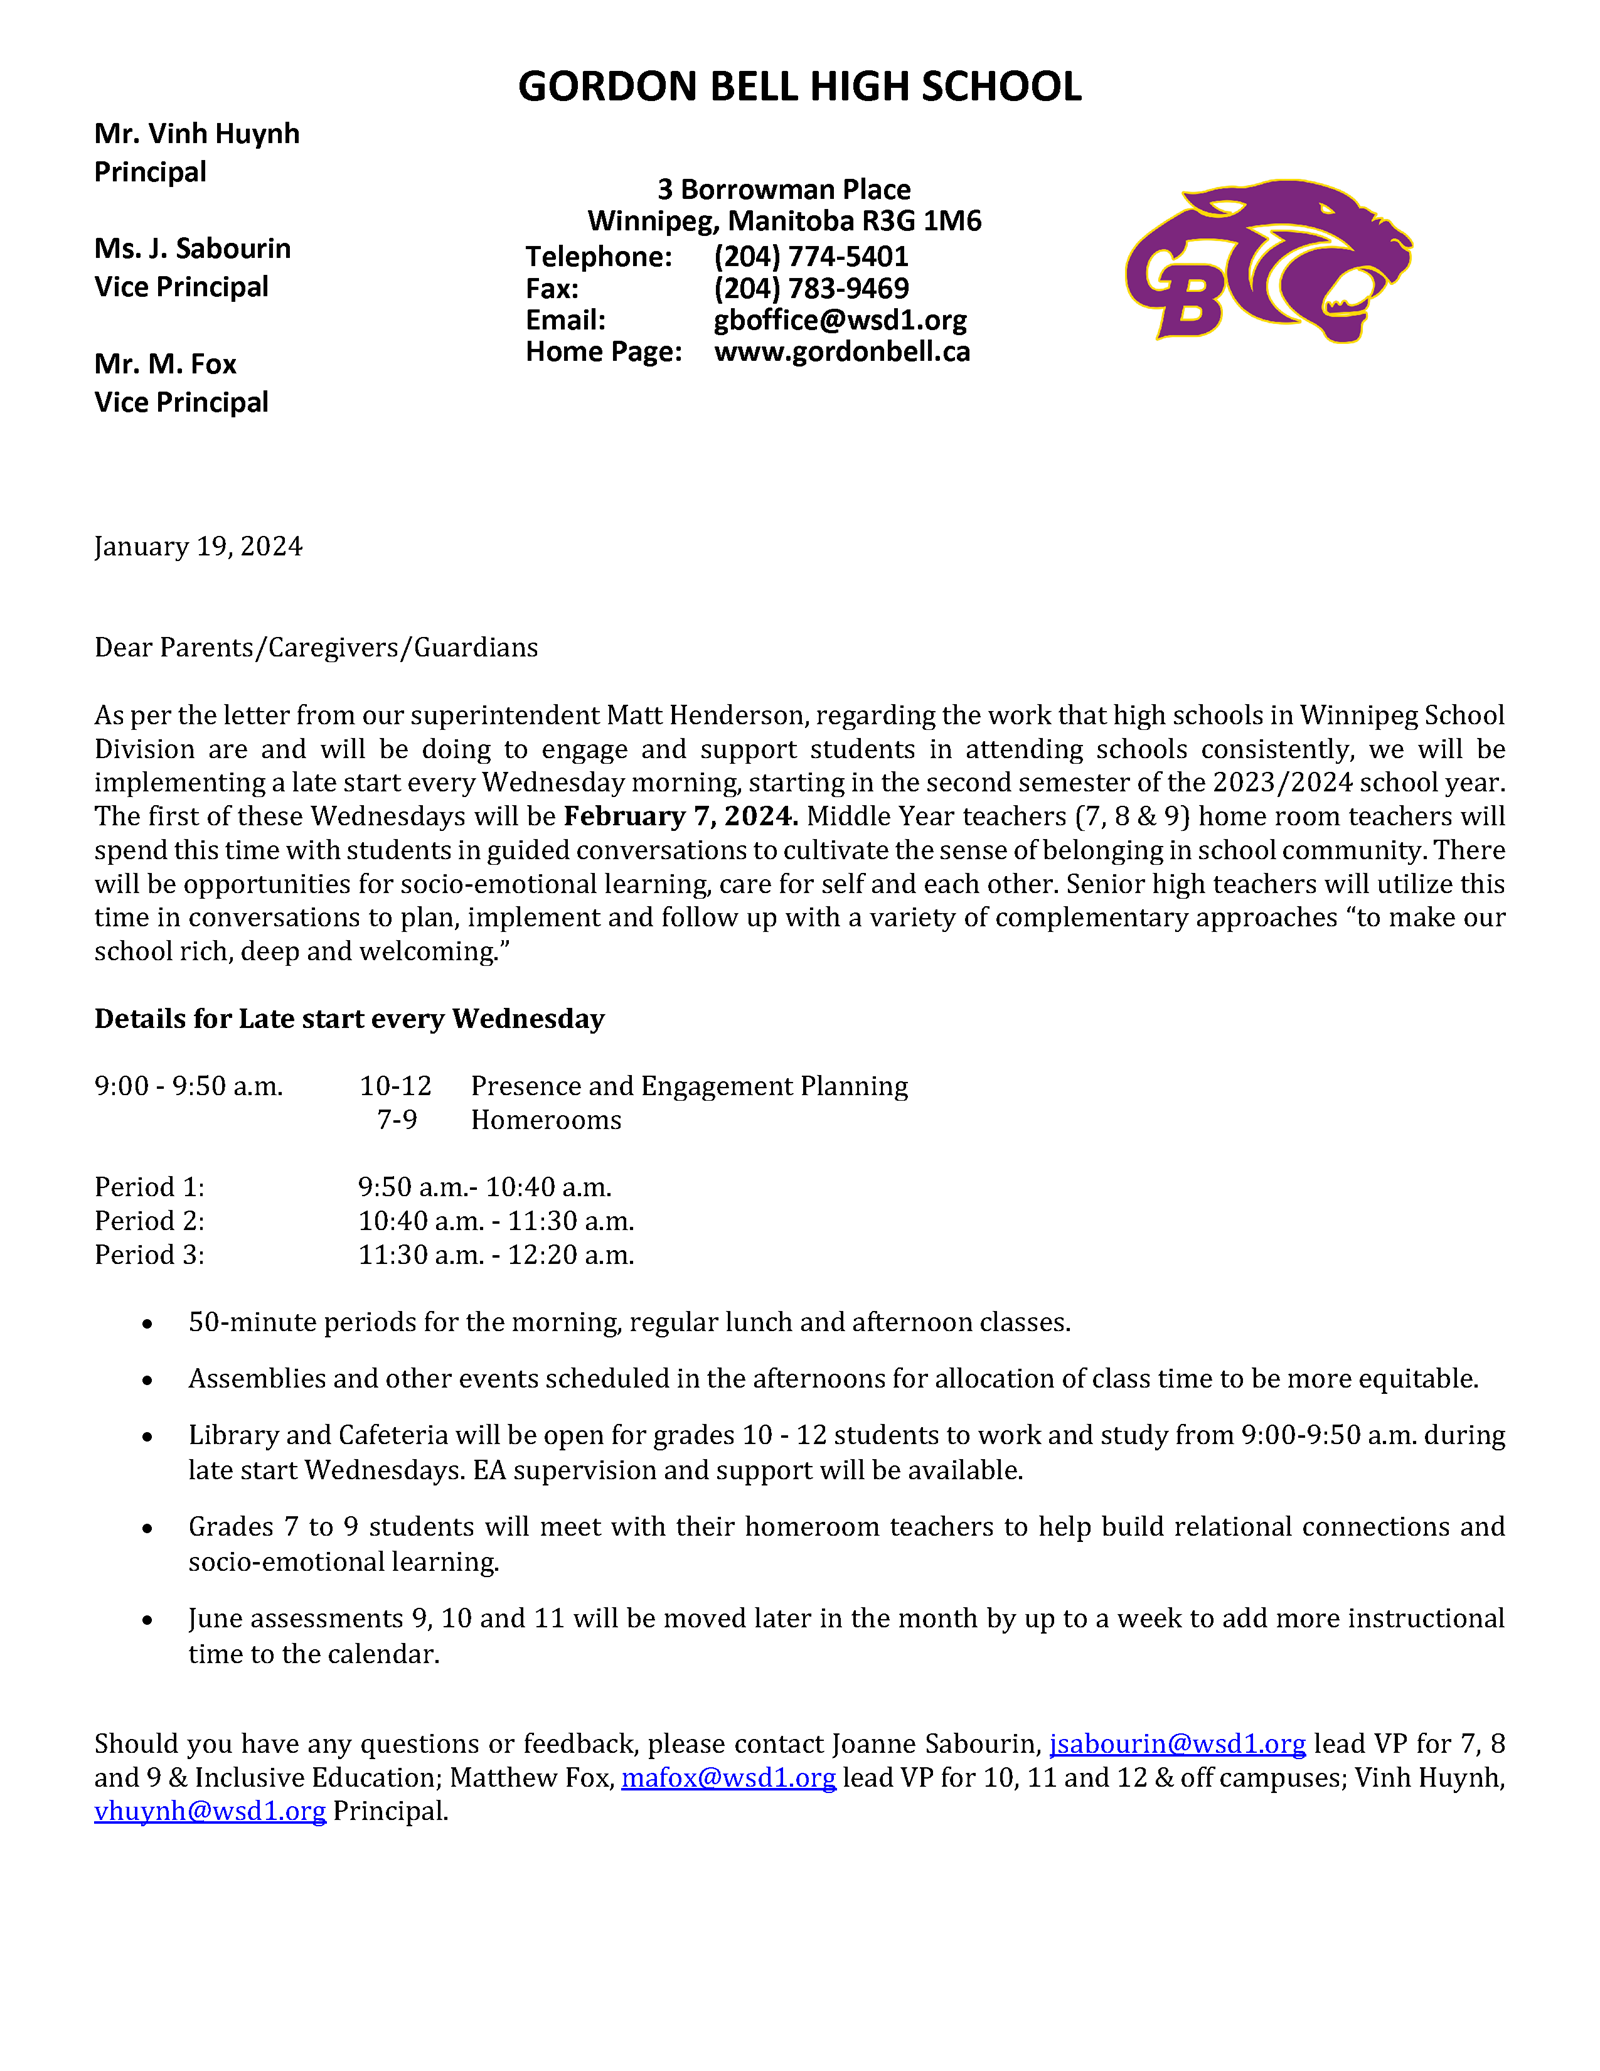 GBHS%20Late%20Start%20Ltr%20to%20Families%20Jan%202024.png